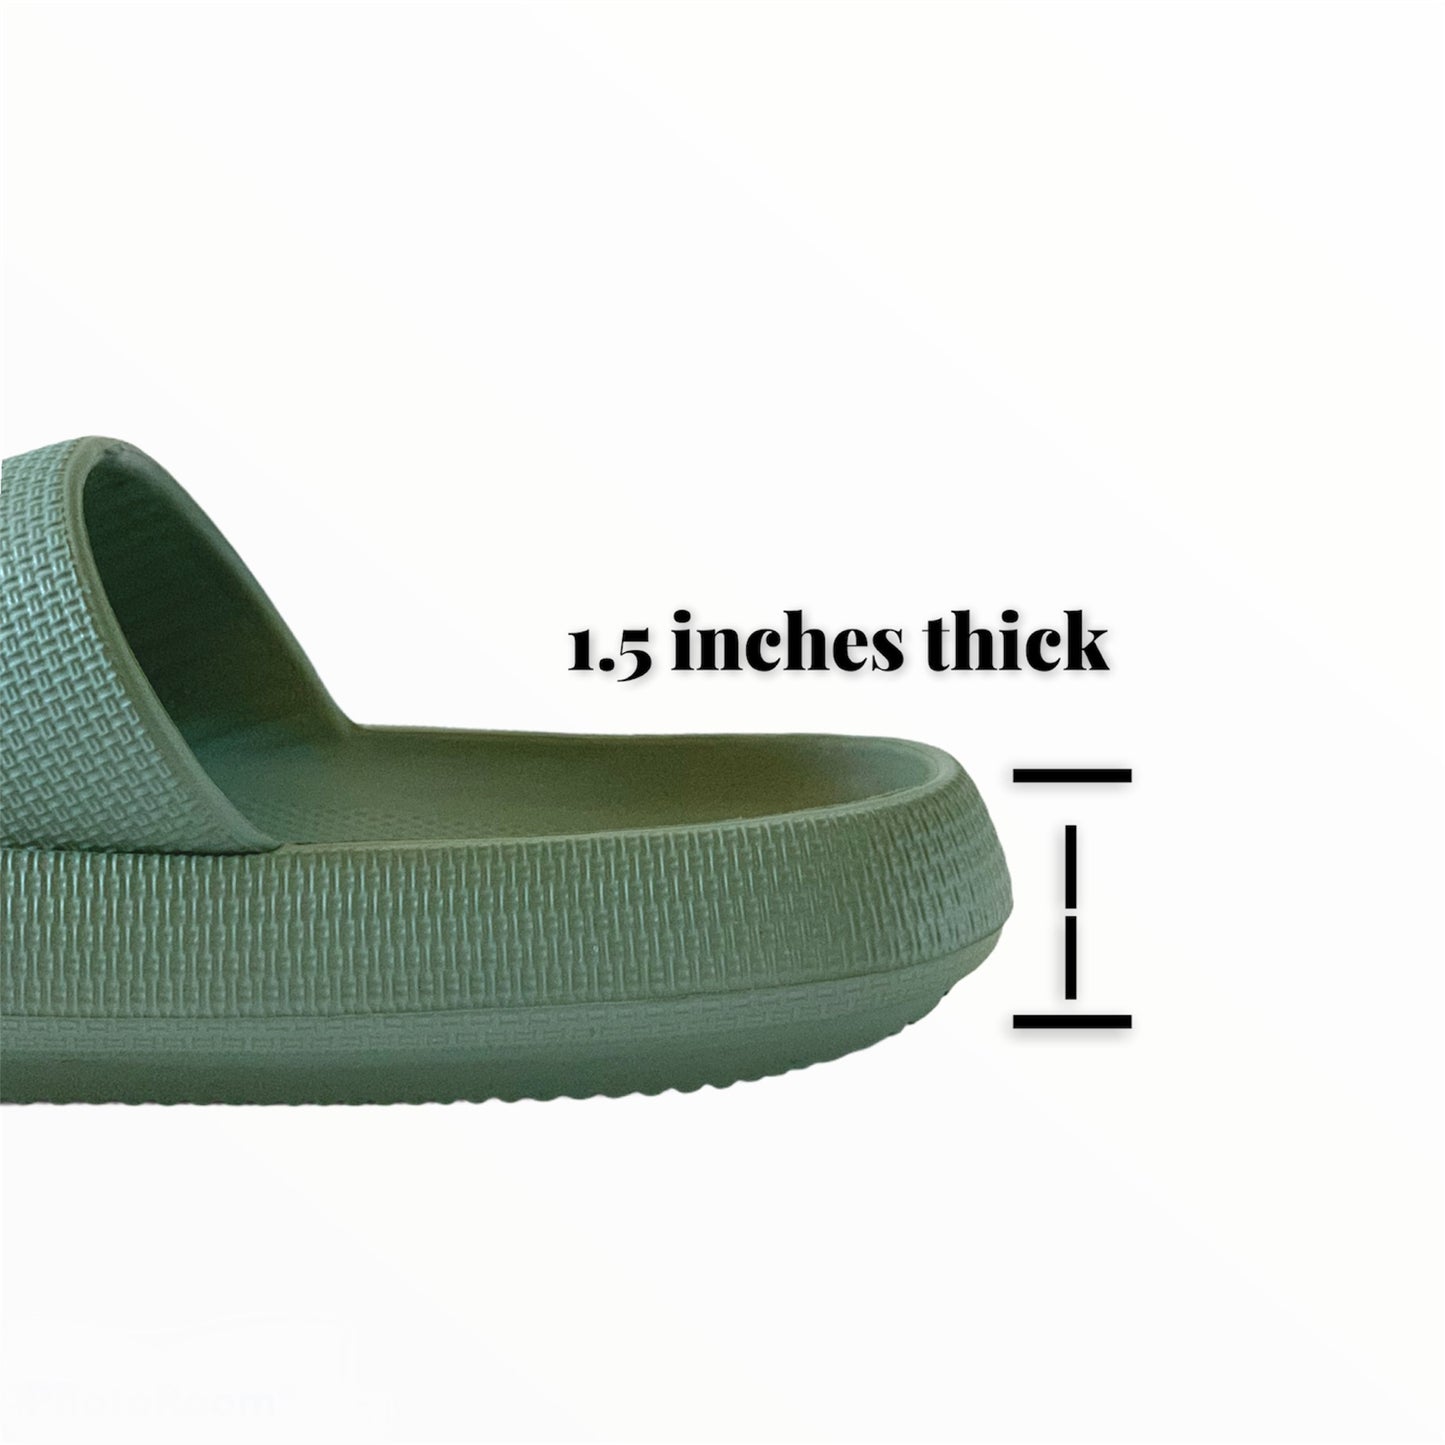 Sootheez Slippers/Sandals Are Soft & Sturdy And Have Good Resilience. Best Slippers, Slides, Sandals For Foot Pain Relief And Bad Joints. Shop Now - Free Shipping. Treat Yourself Today. Styles: 3D Comfortable Slides, Recovery Sandals, Comfy Kids Slides.